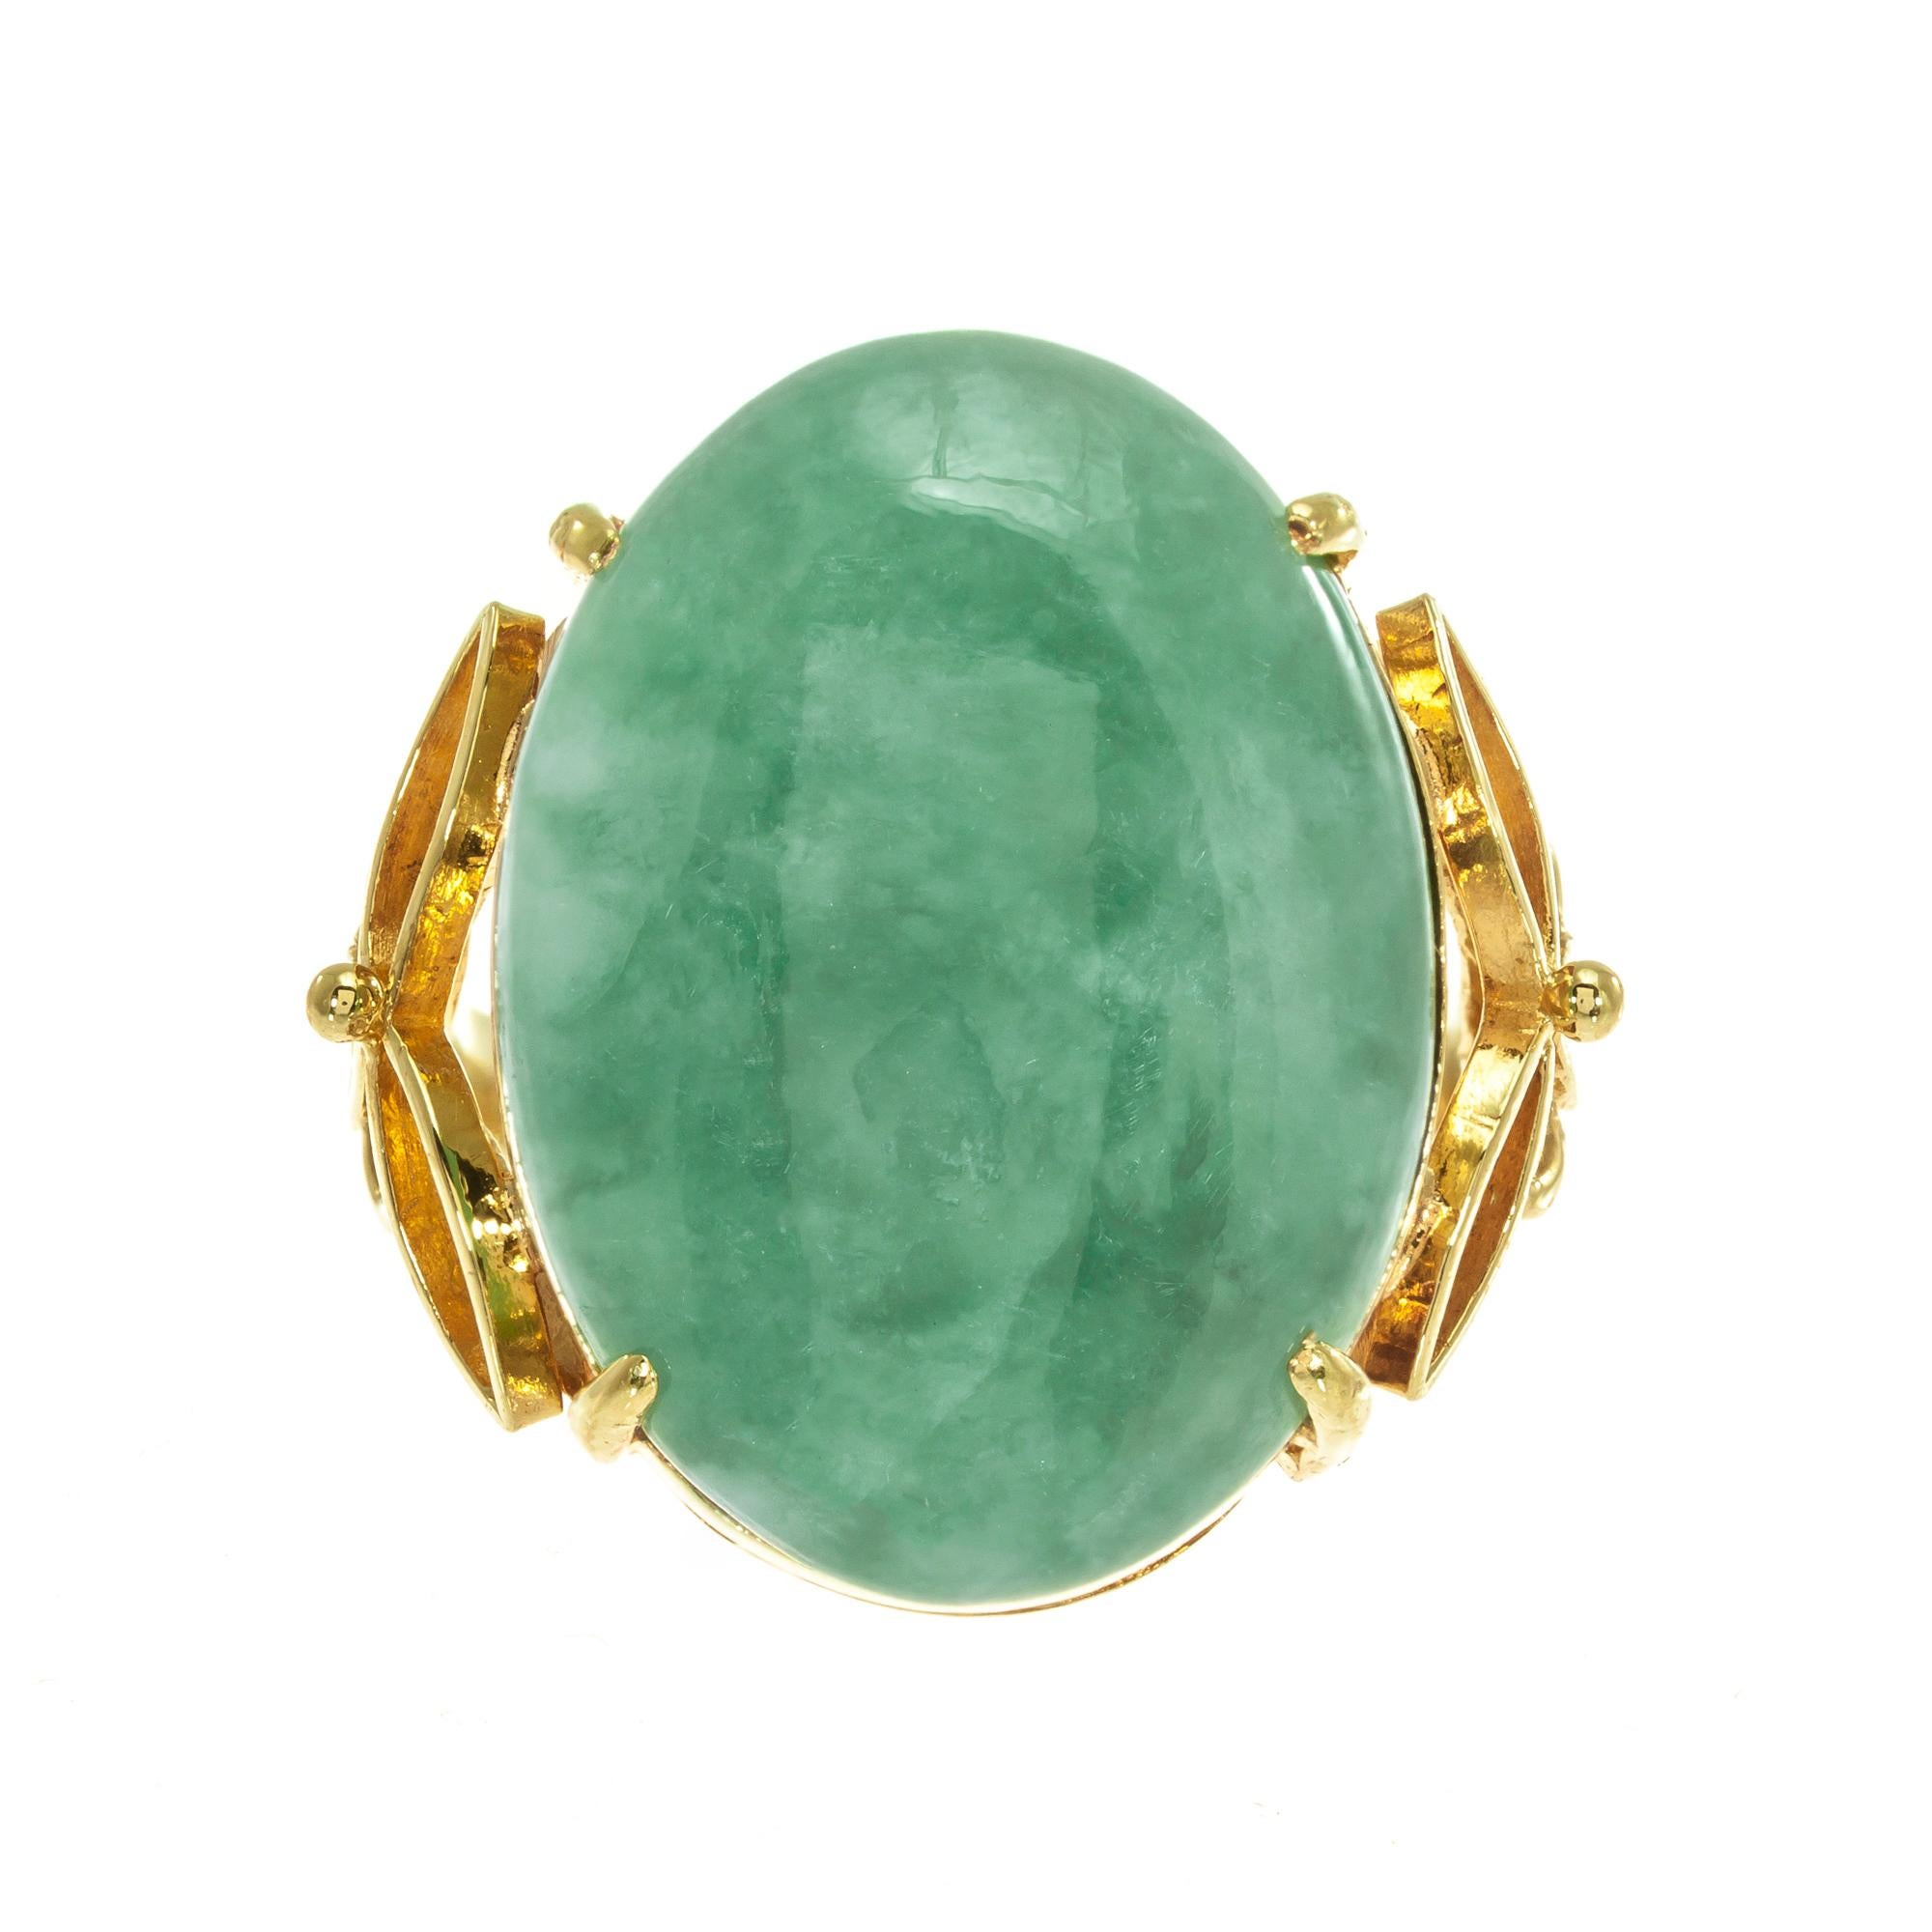 Natural well-polished oval Jadeite Jade center stone set in 18k yellow gold cocktail ring. GIA certified

1 double cabochon mottled green Jadeite Jade GIA Certificate # 6191993294
Size 5 and sizable 
18k Yellow Gold
Stamped: 75
Hallmark:
7.8